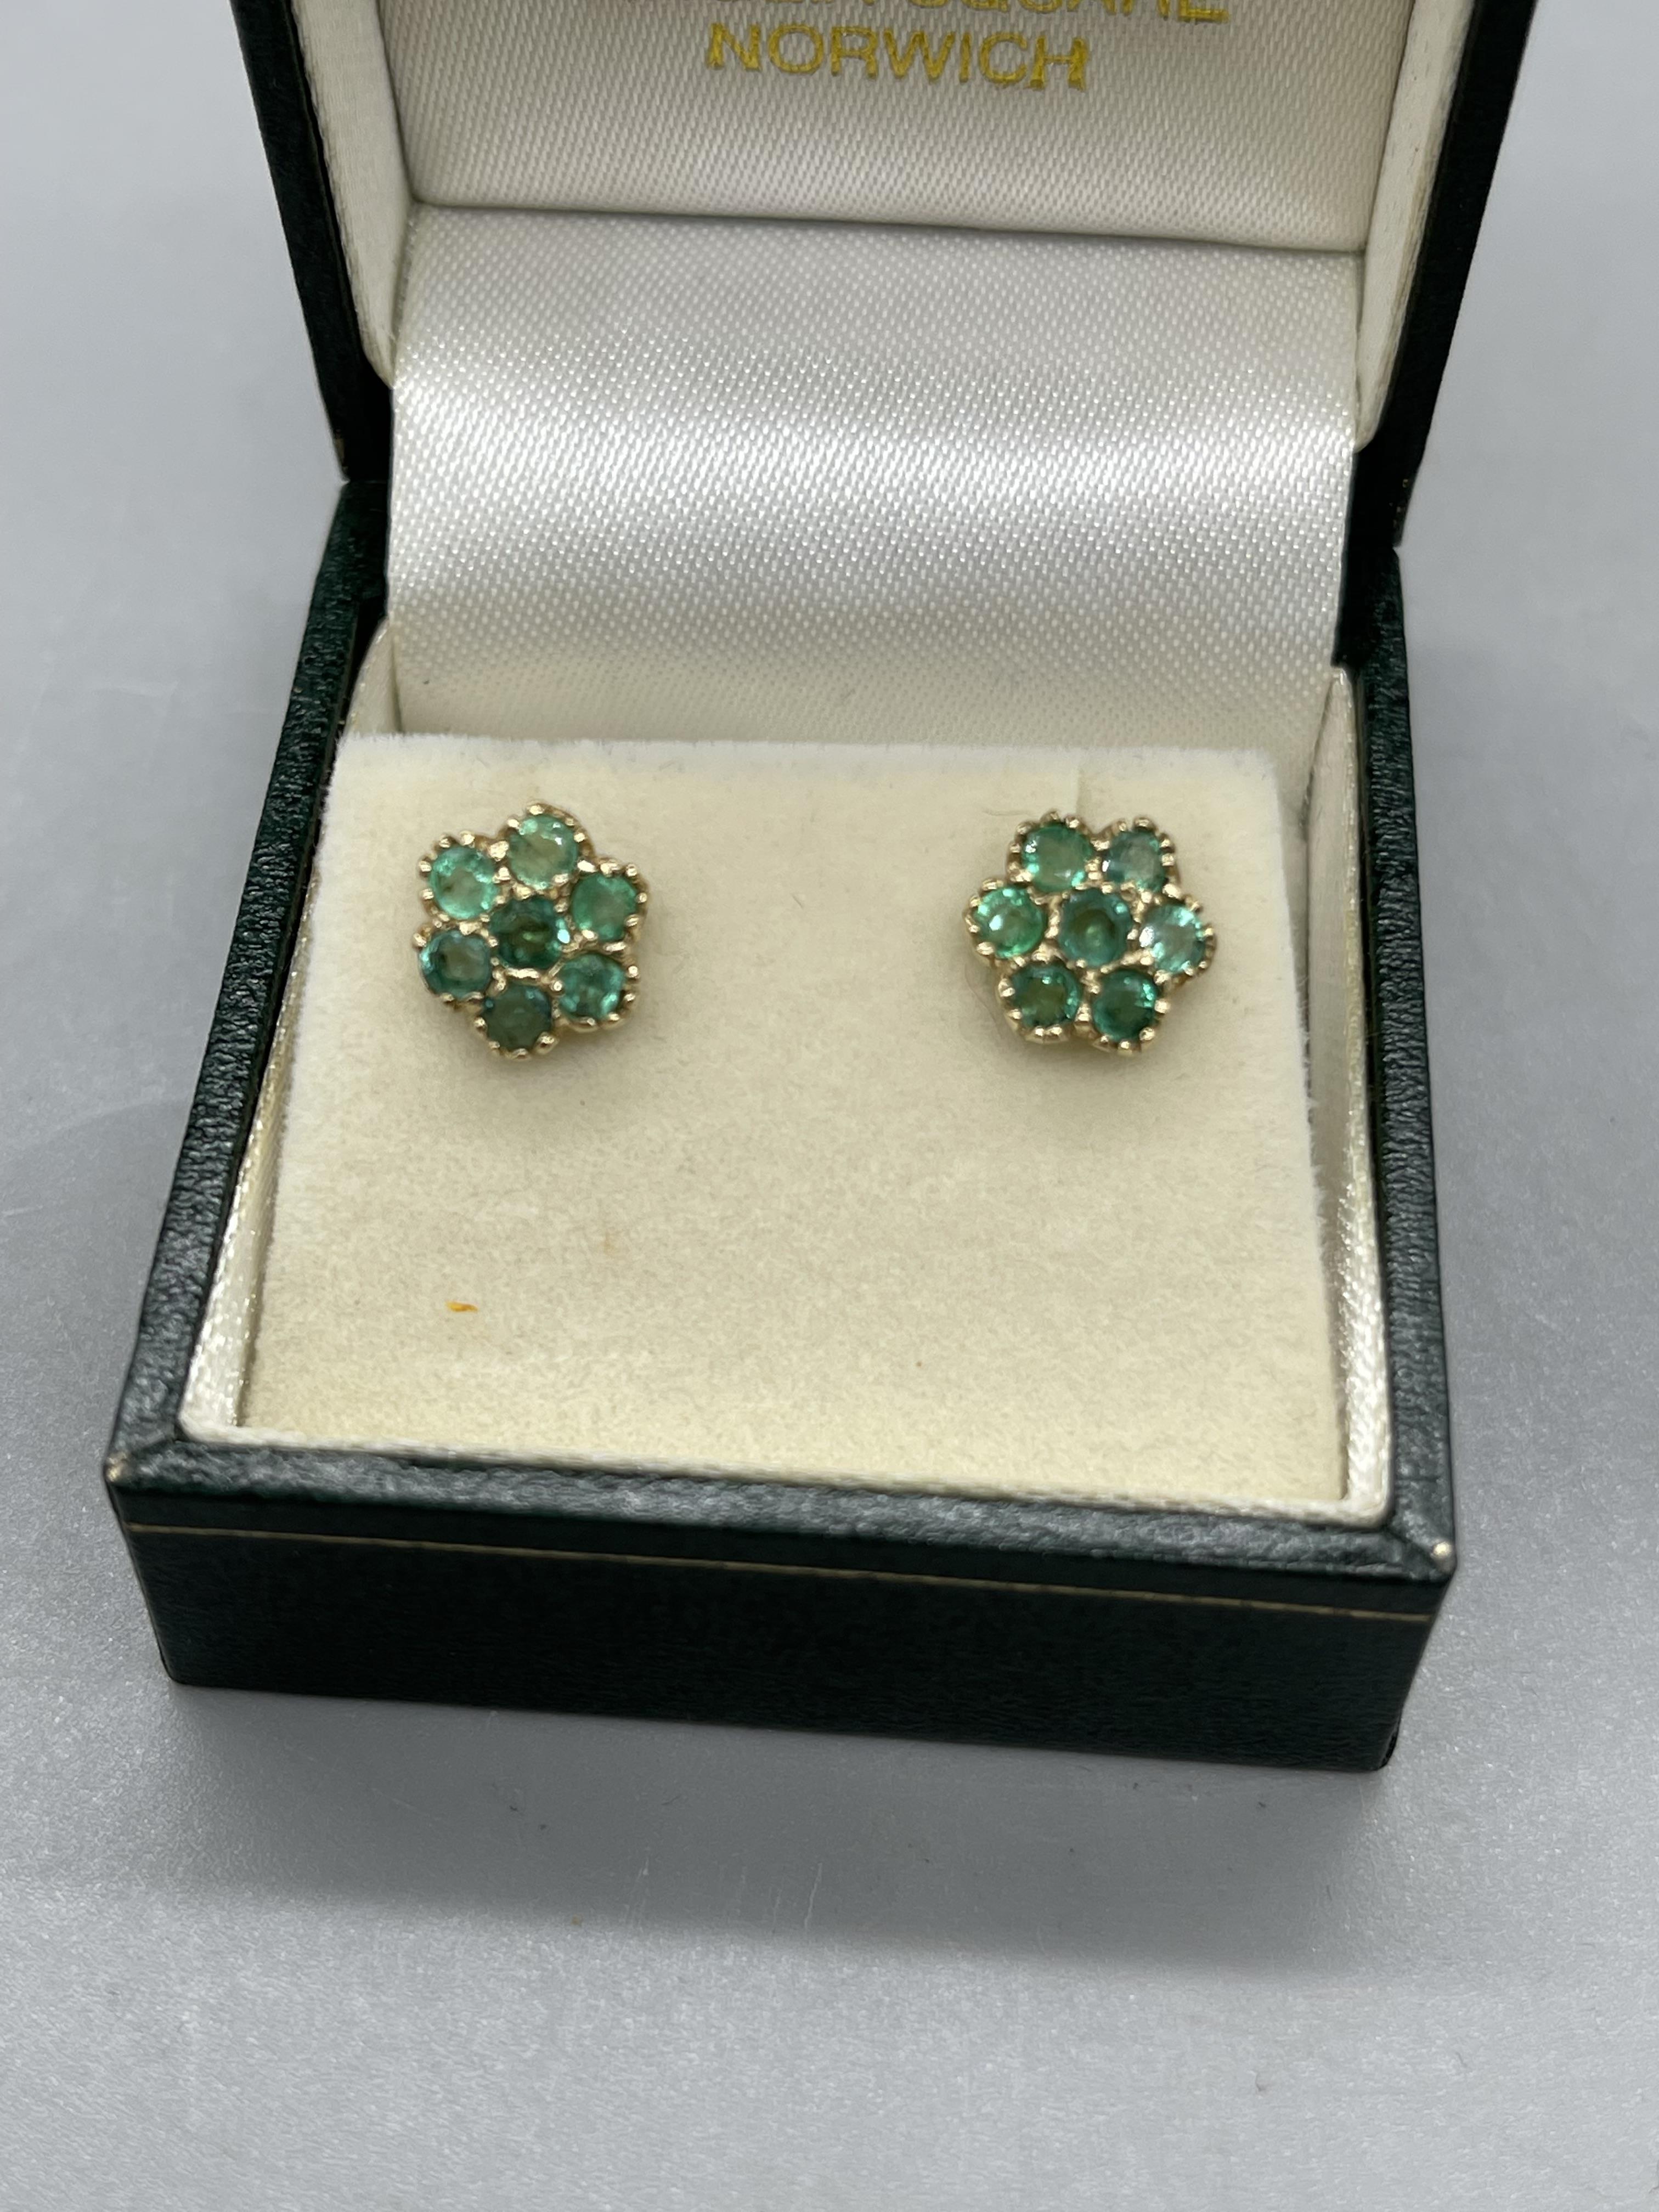 9ct Gold Green Gemstone Cluster Ring and Earrings - Image 2 of 10